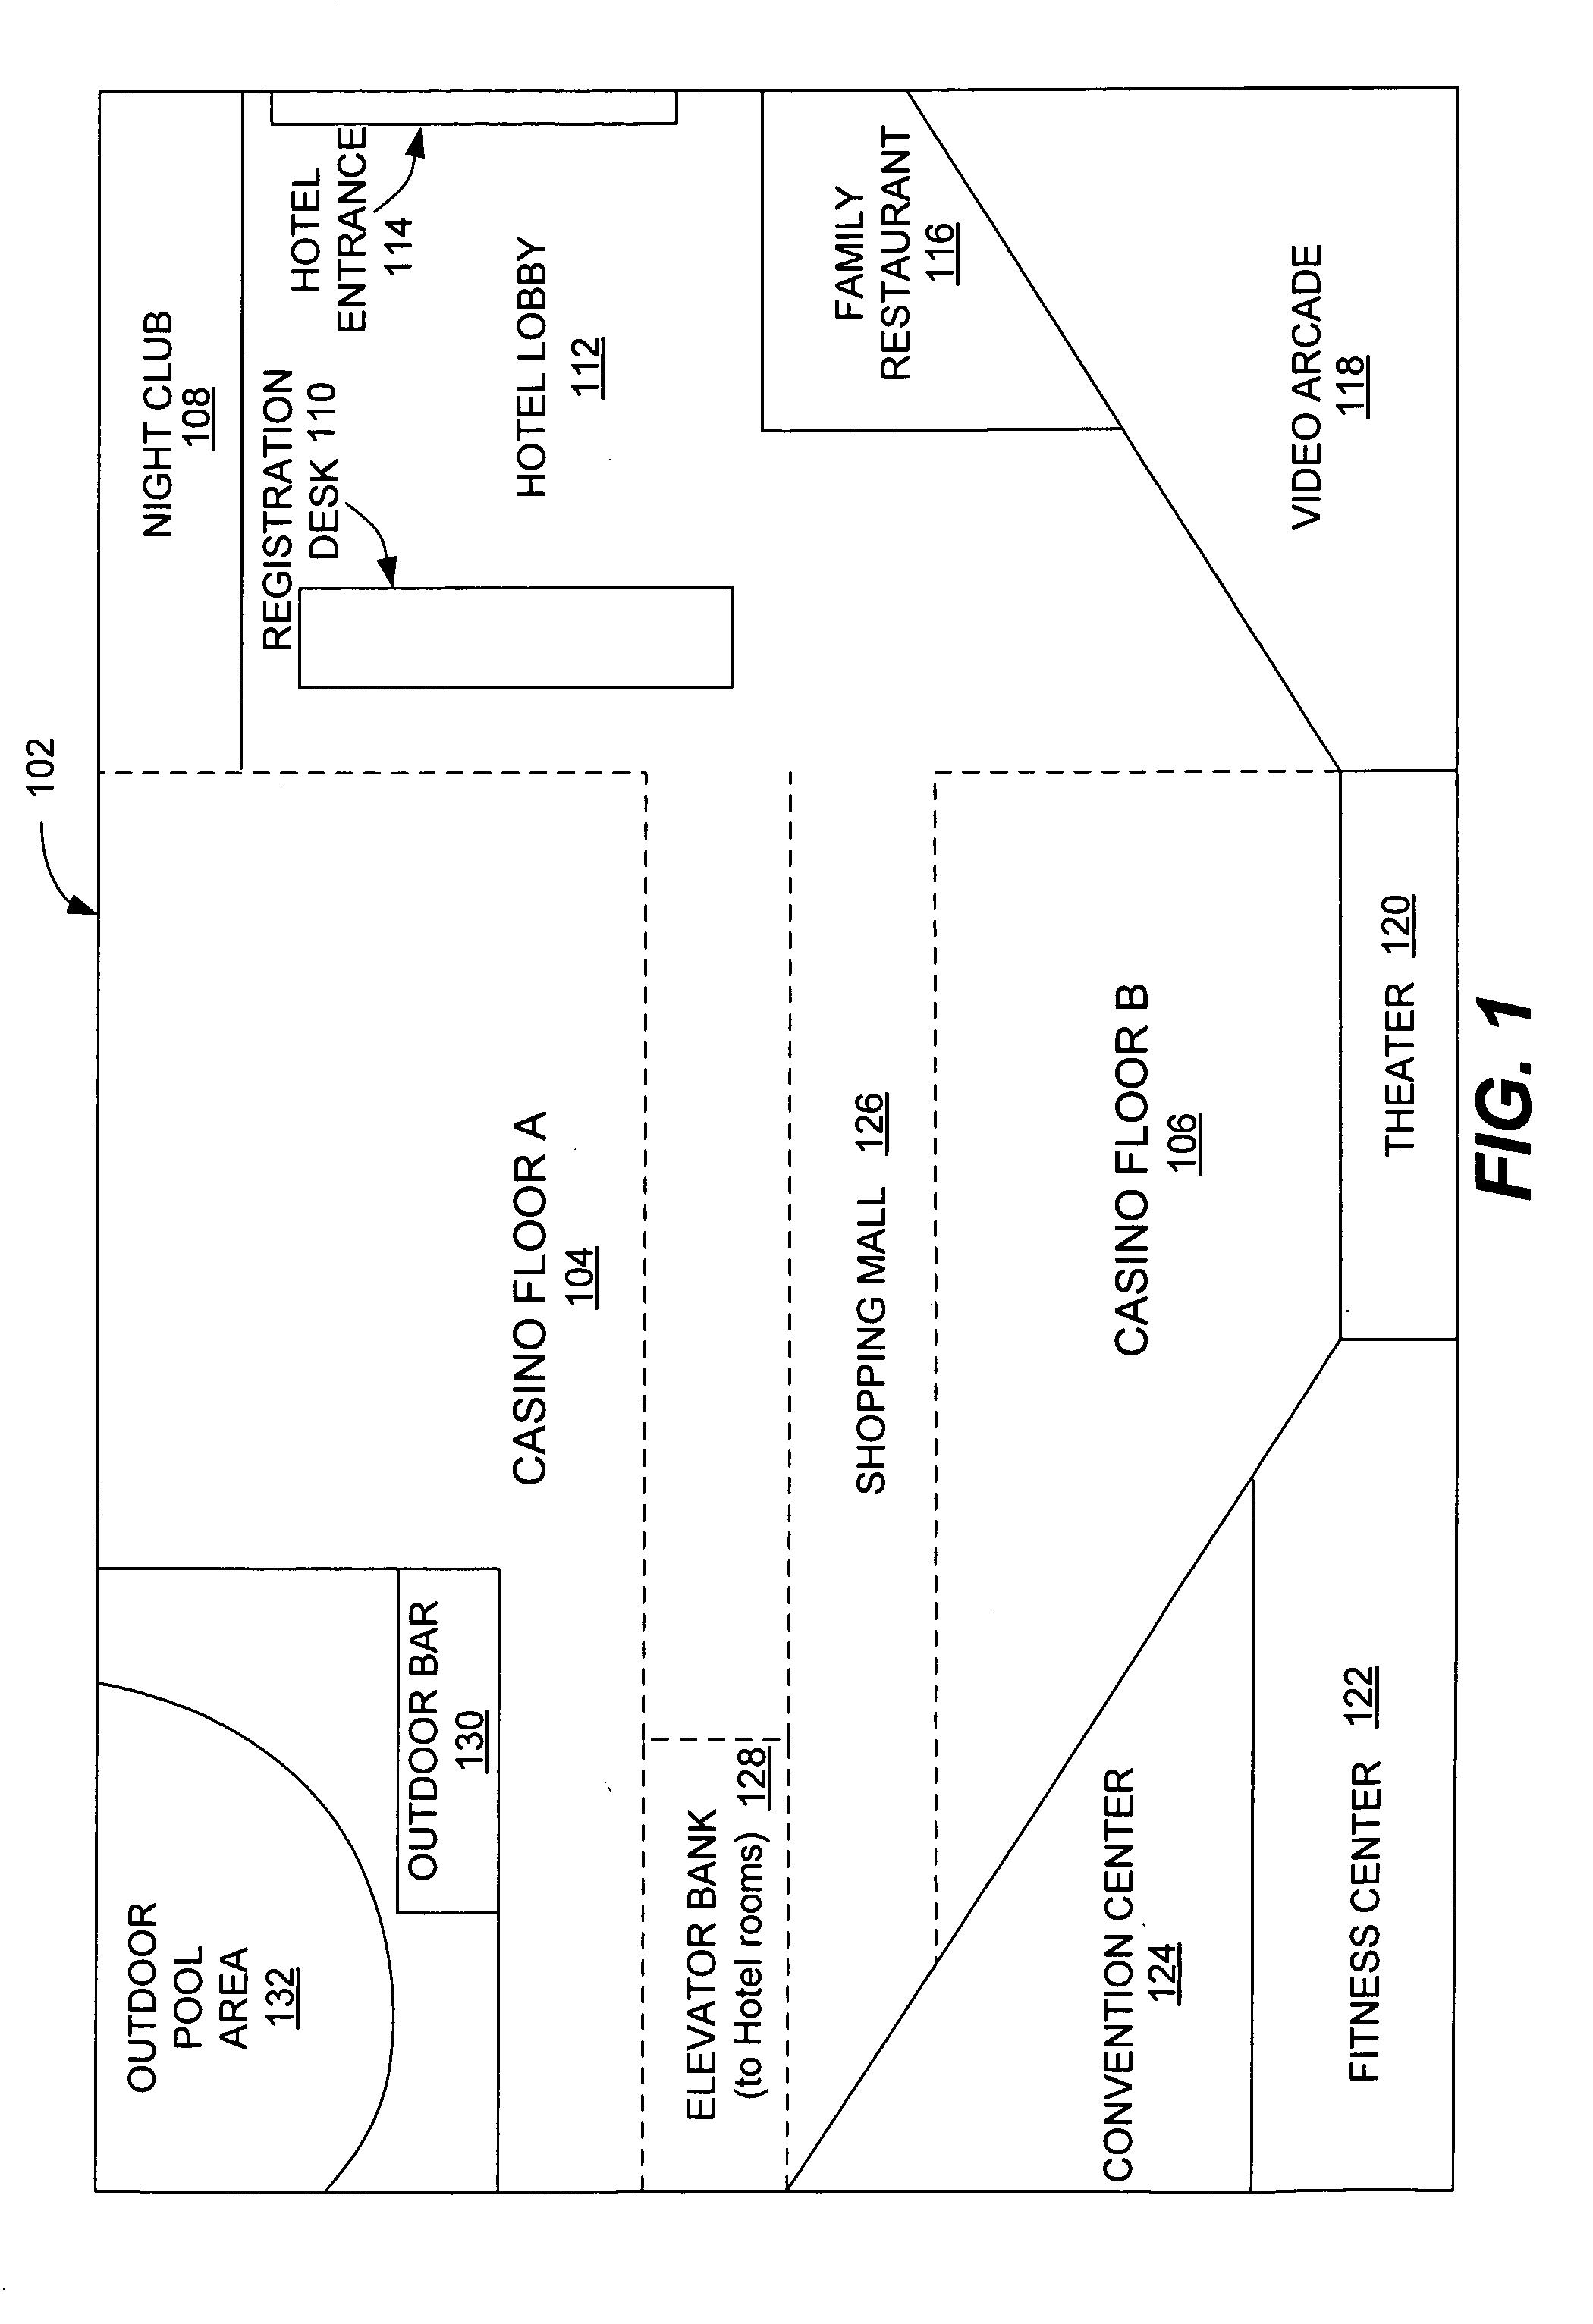 Mobile gaming devices for use in a gaming network having gaming and non-gaming zones